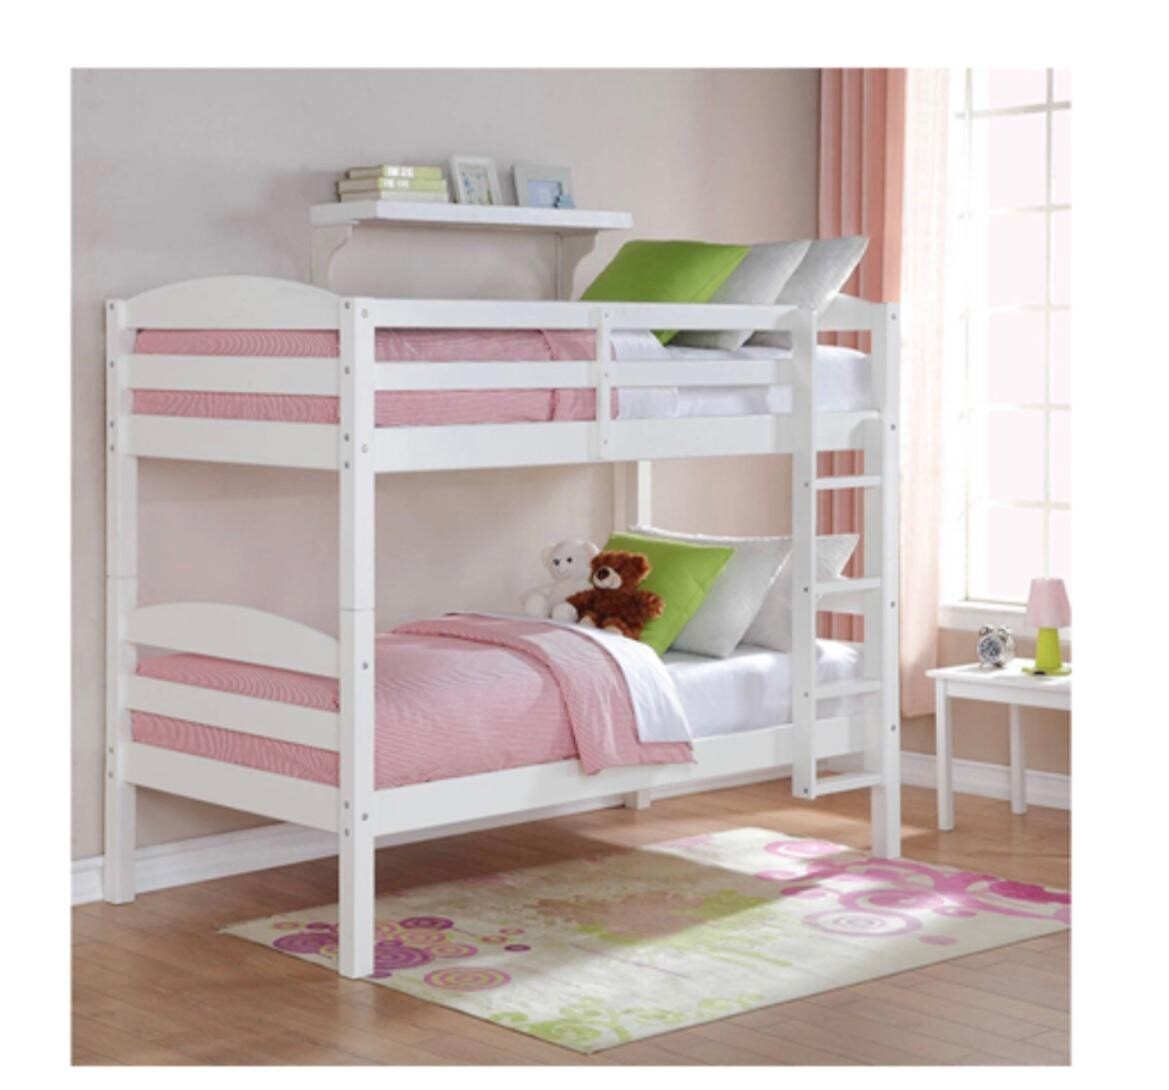 BH&G White Twin Bunk Beds, needs touchups #2199